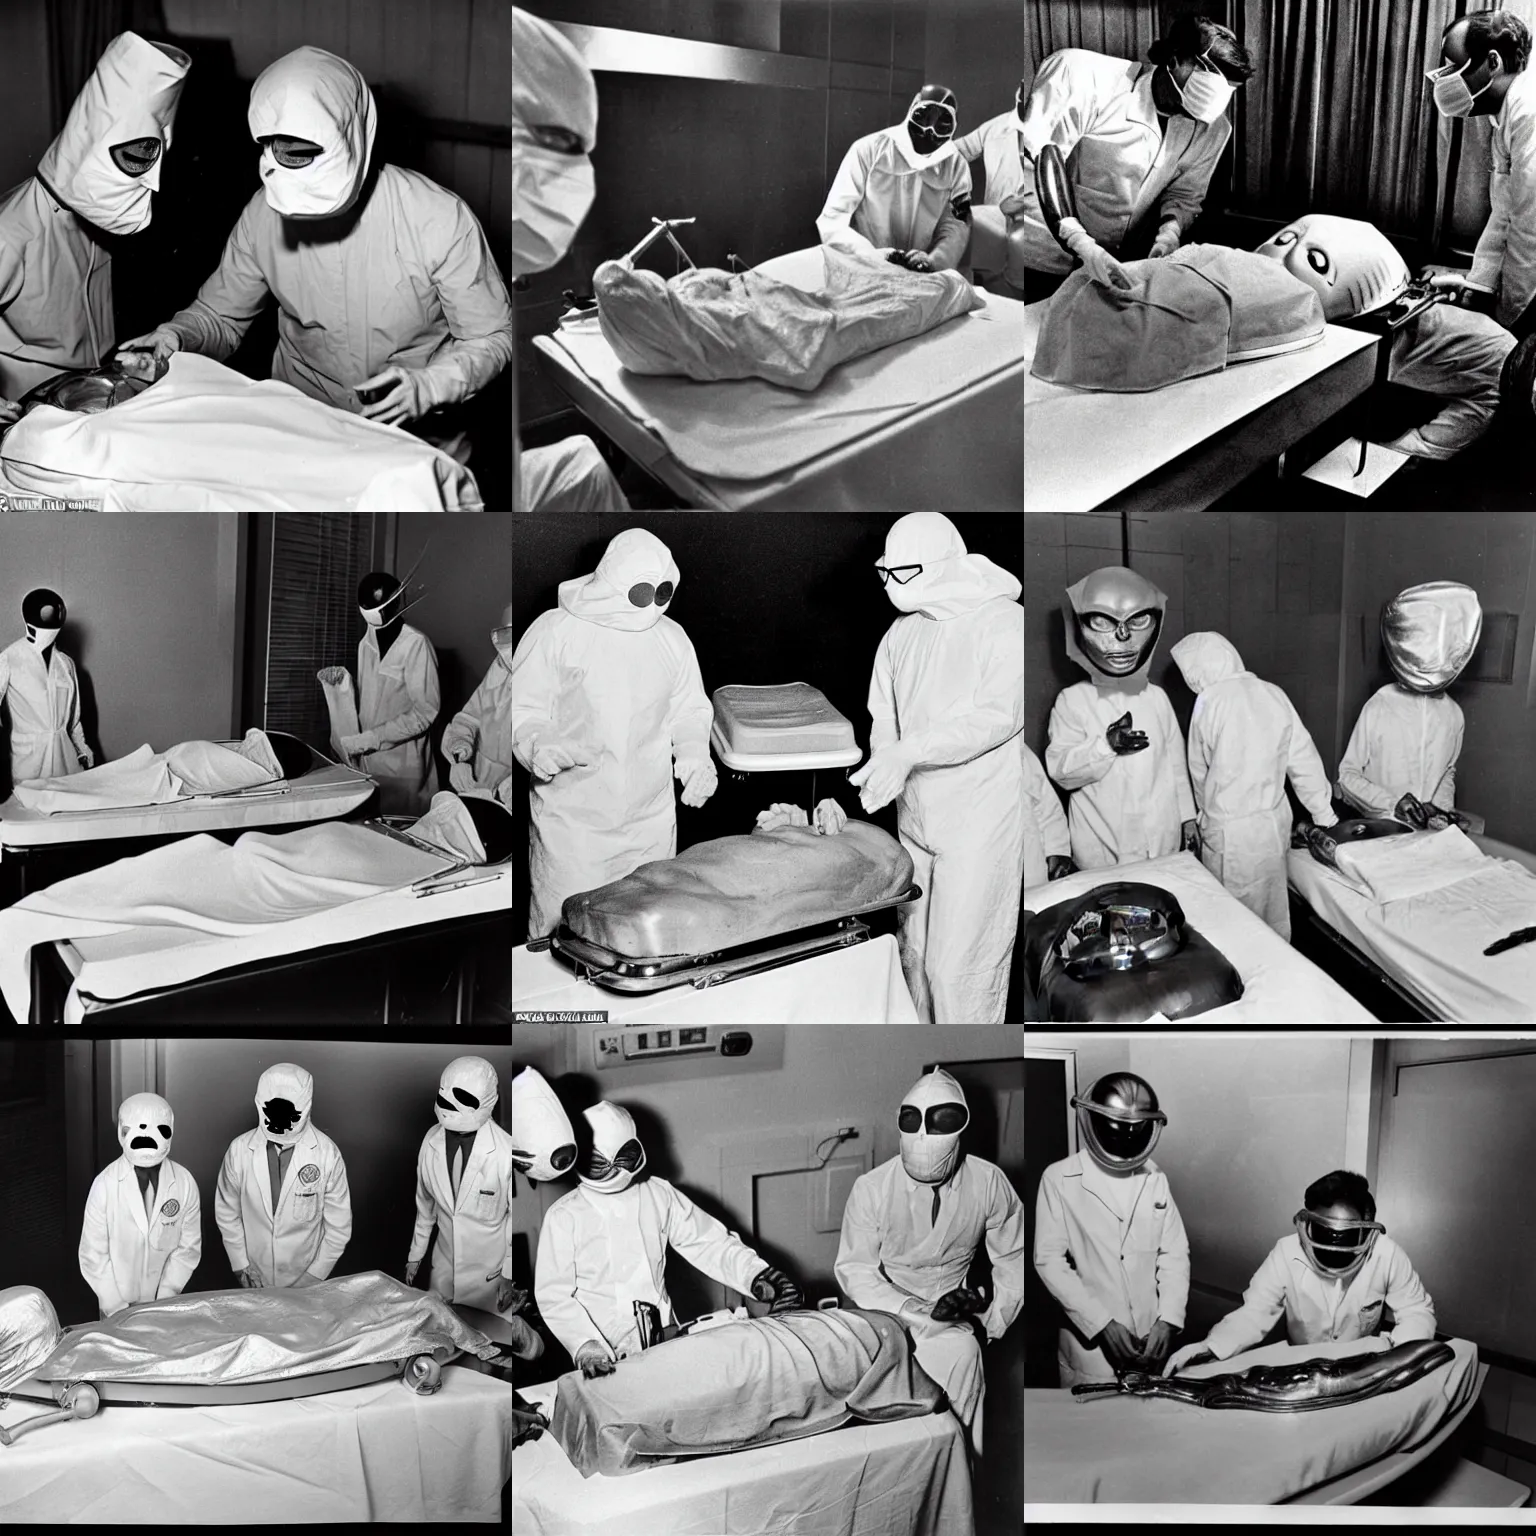 Prompt: 1960s photographic evidence of alien autopsy, doctors wearing masks and examining body with alien face, partially covered by sheets